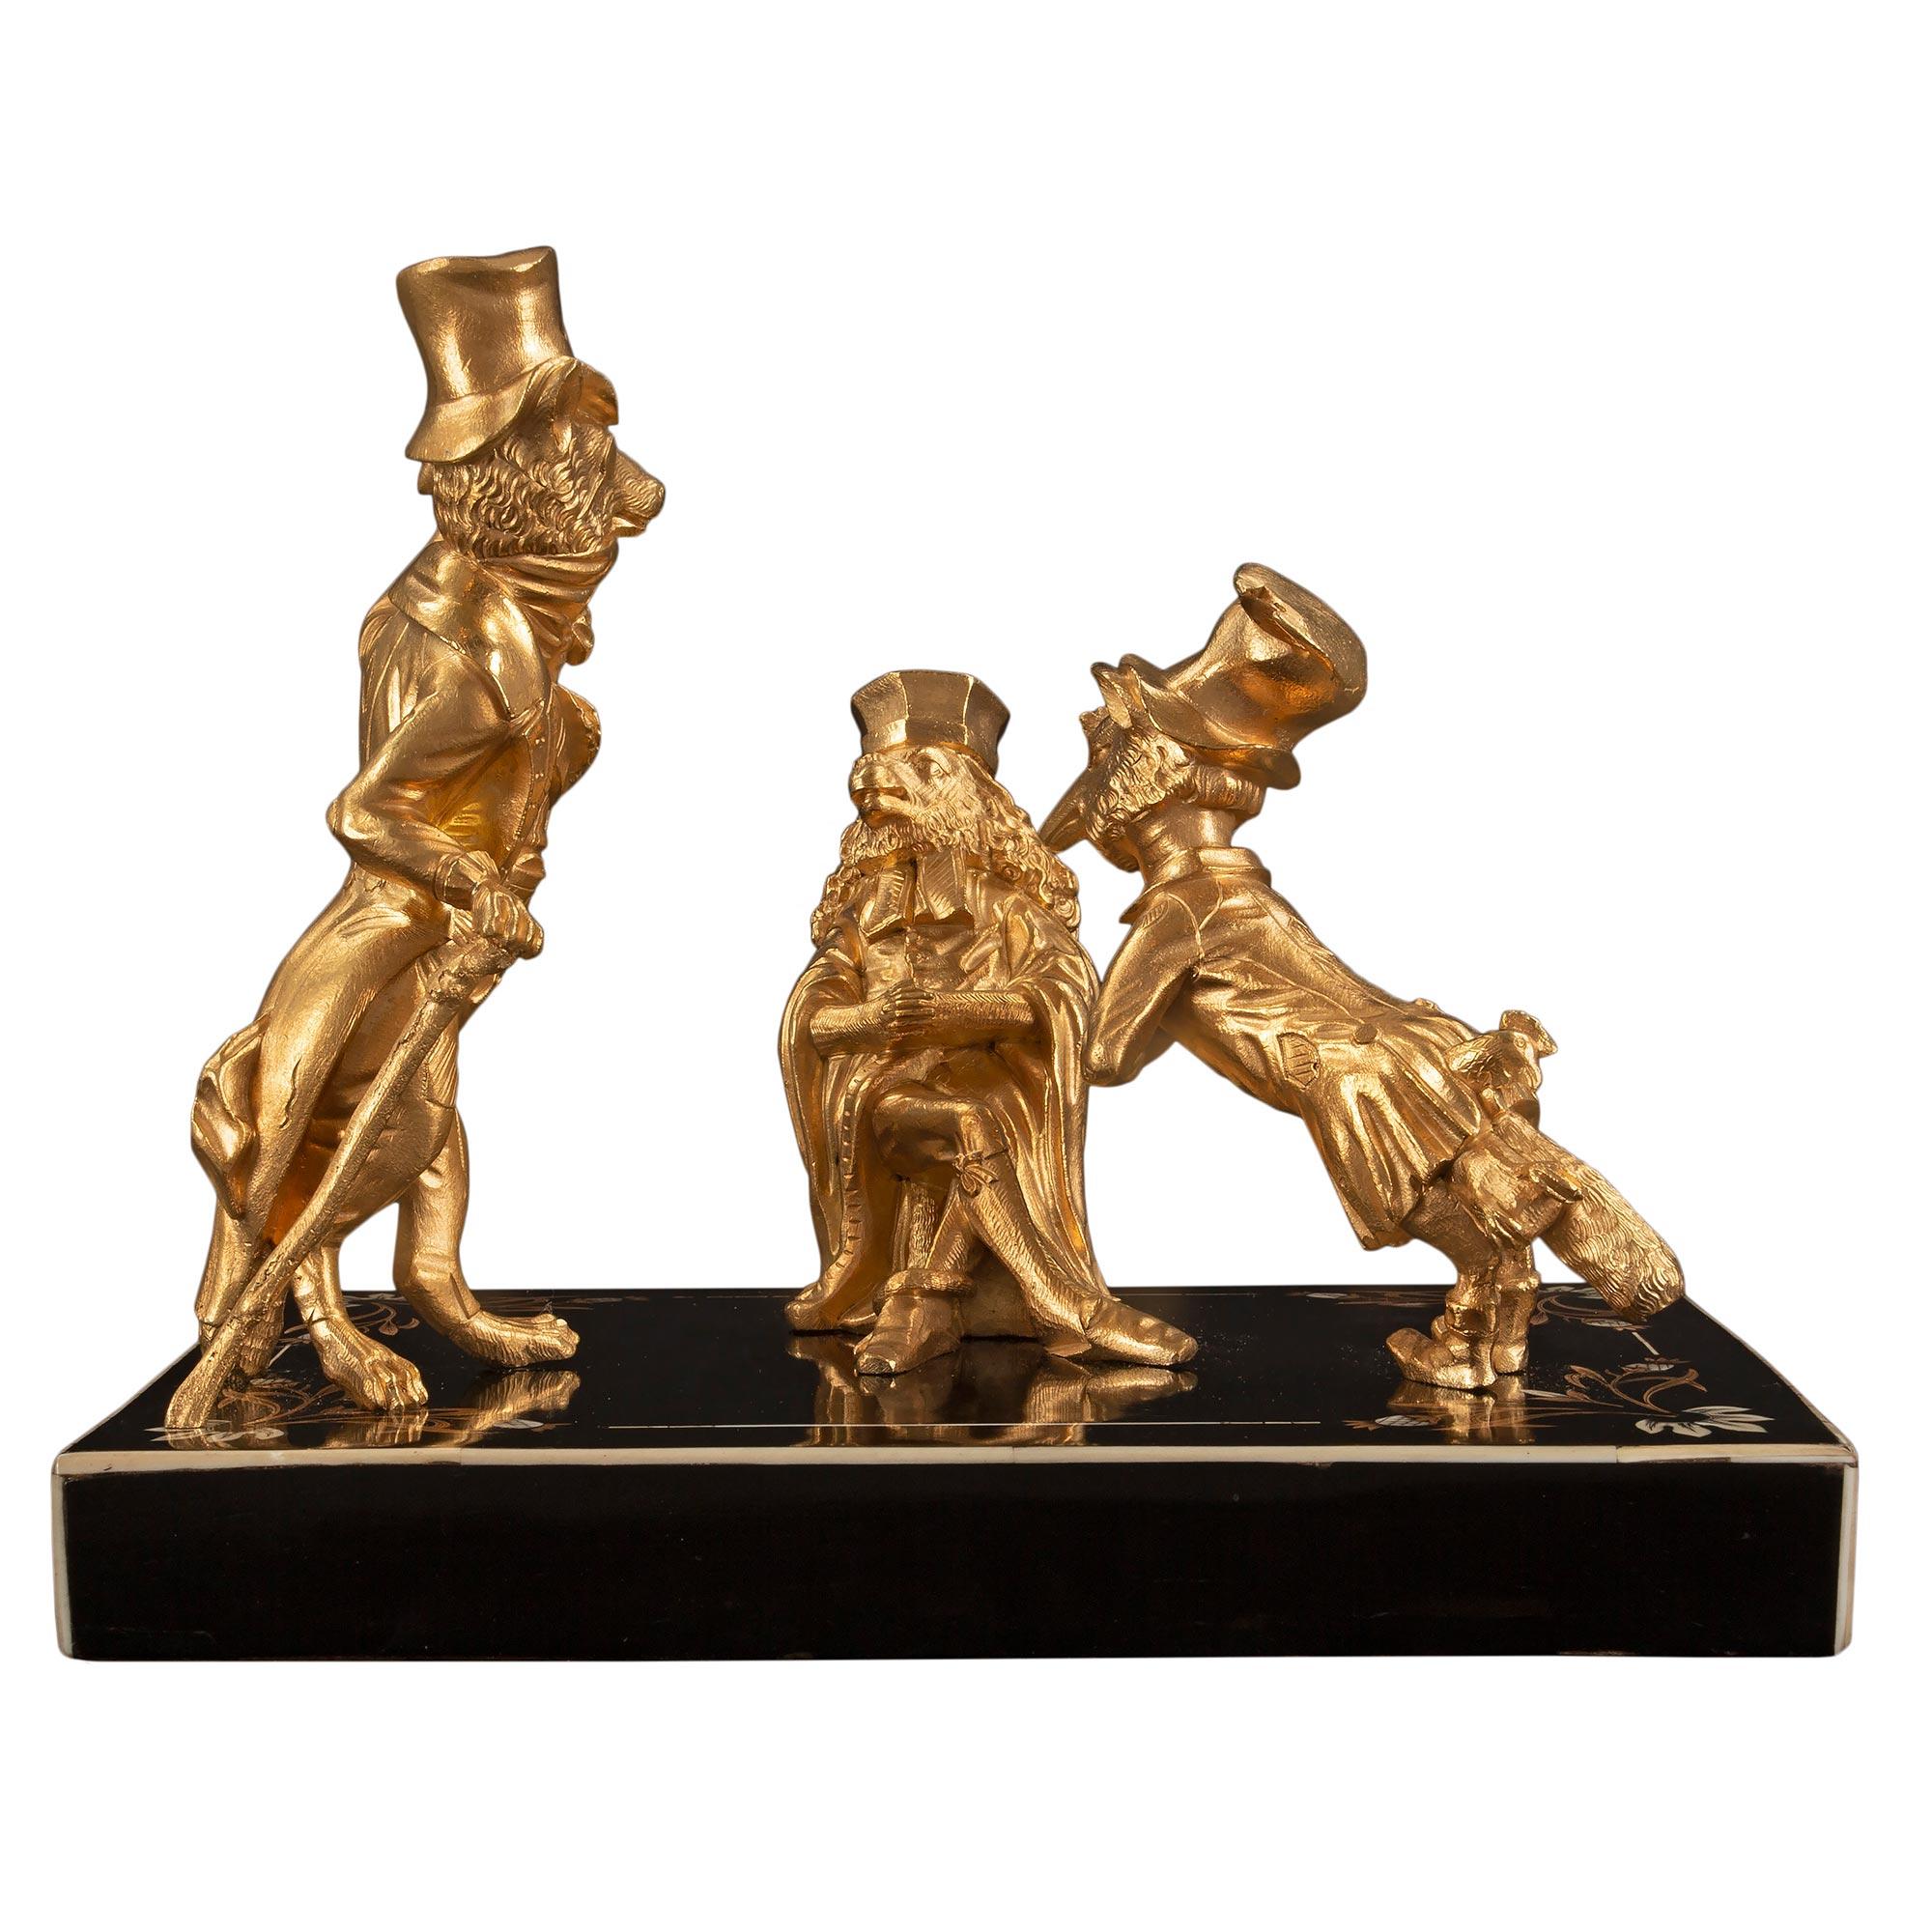 A charming and high quality French 19th century Louis XVI st. Napoleon III period ormolu statuary grouping of Jean de la Fontaine's Fable 